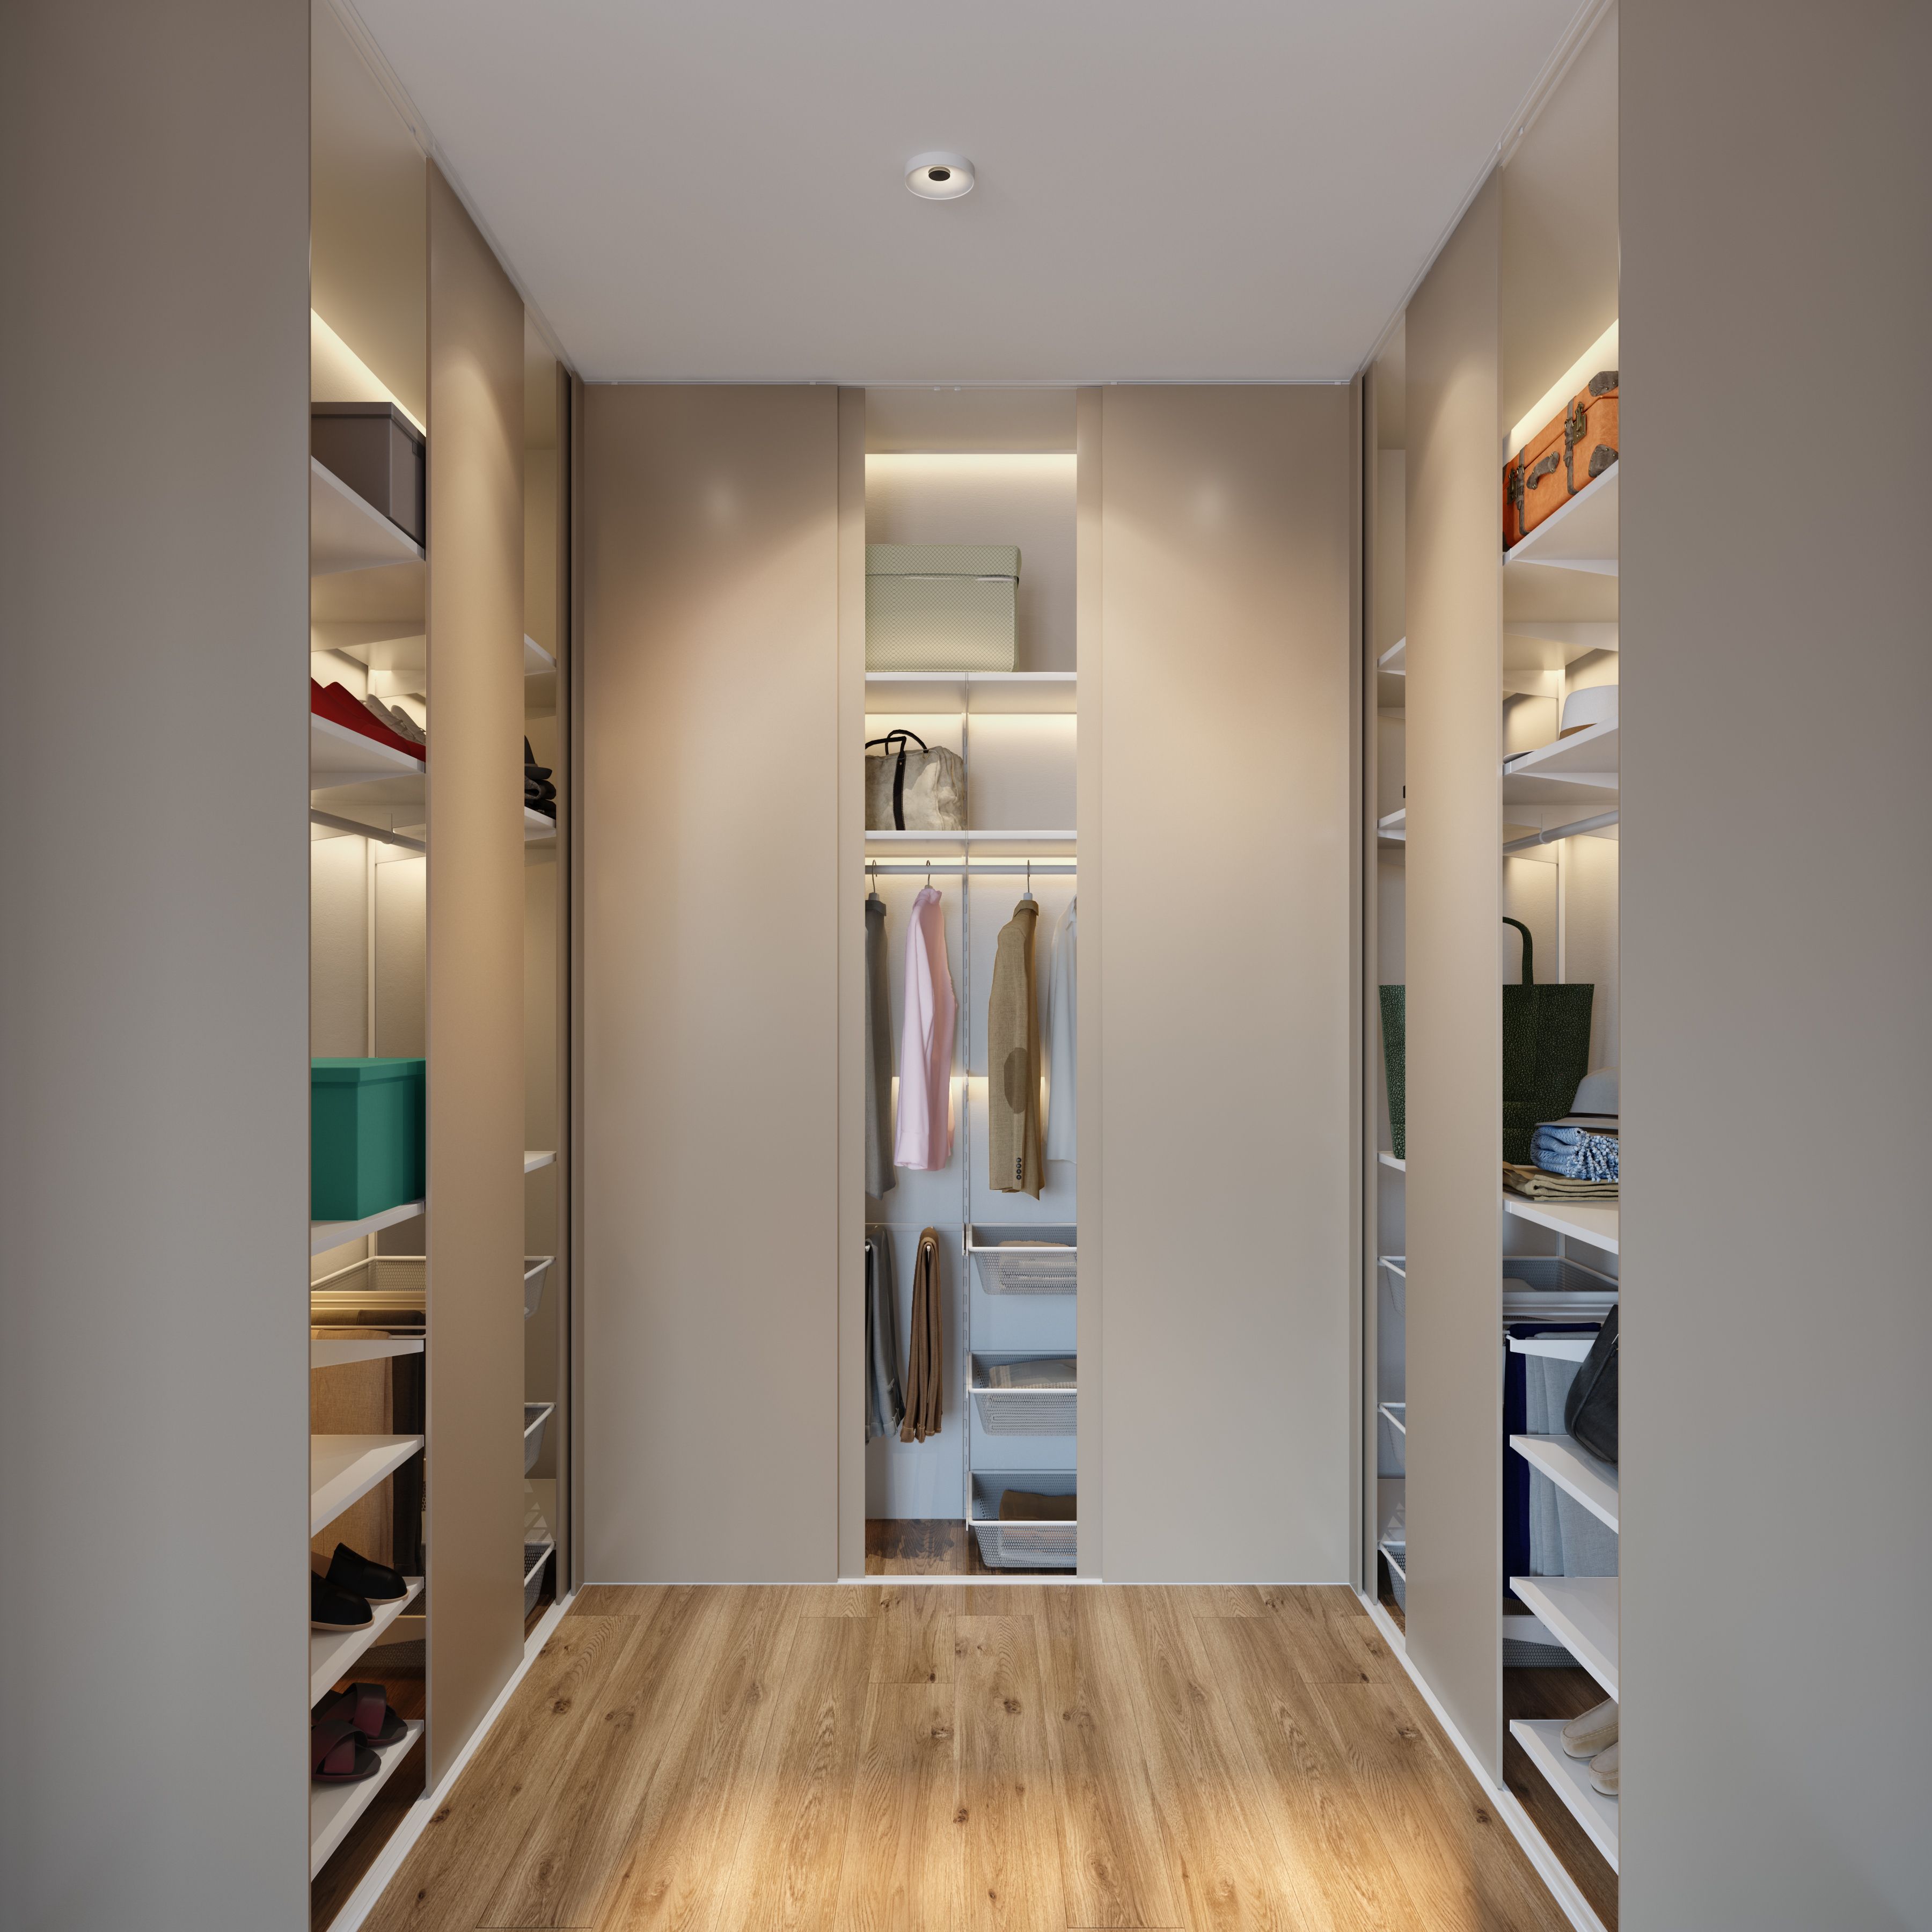 Spacious Walk-In Wardrobe Design With Lighting And White Shelves